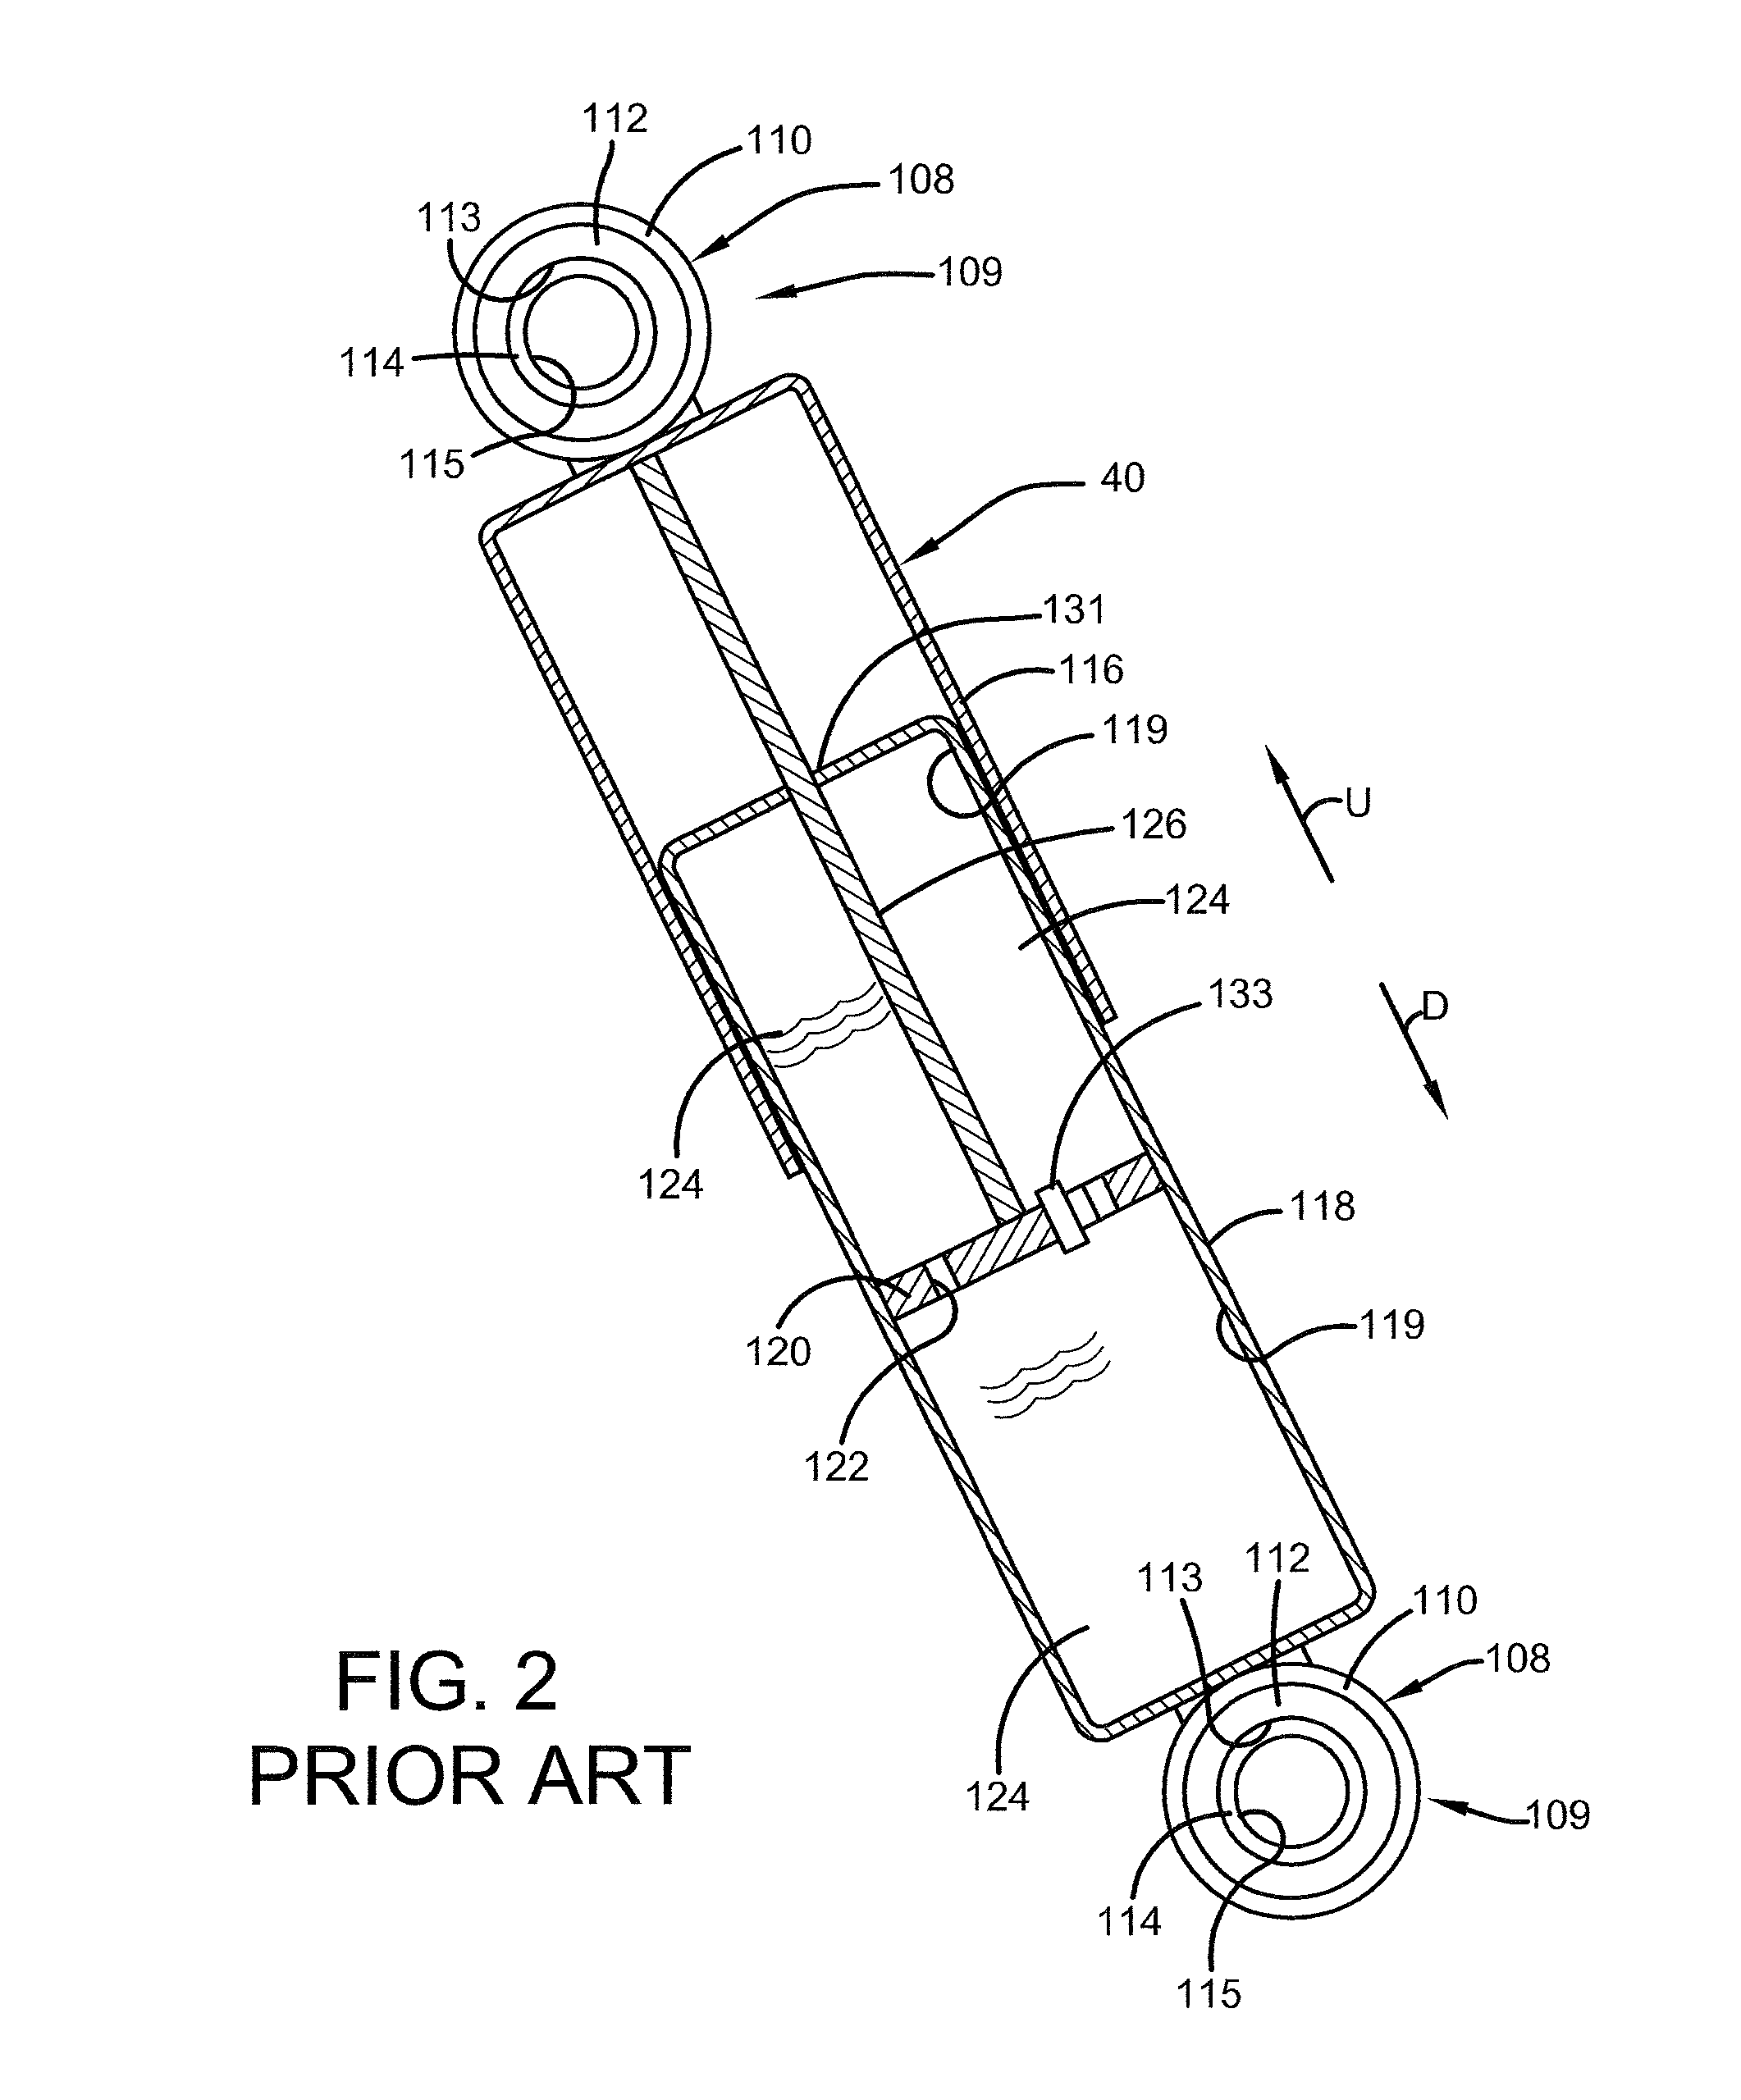 Damping air spring and shock absorber combination for heavy-duty vehicle axle/suspension systems